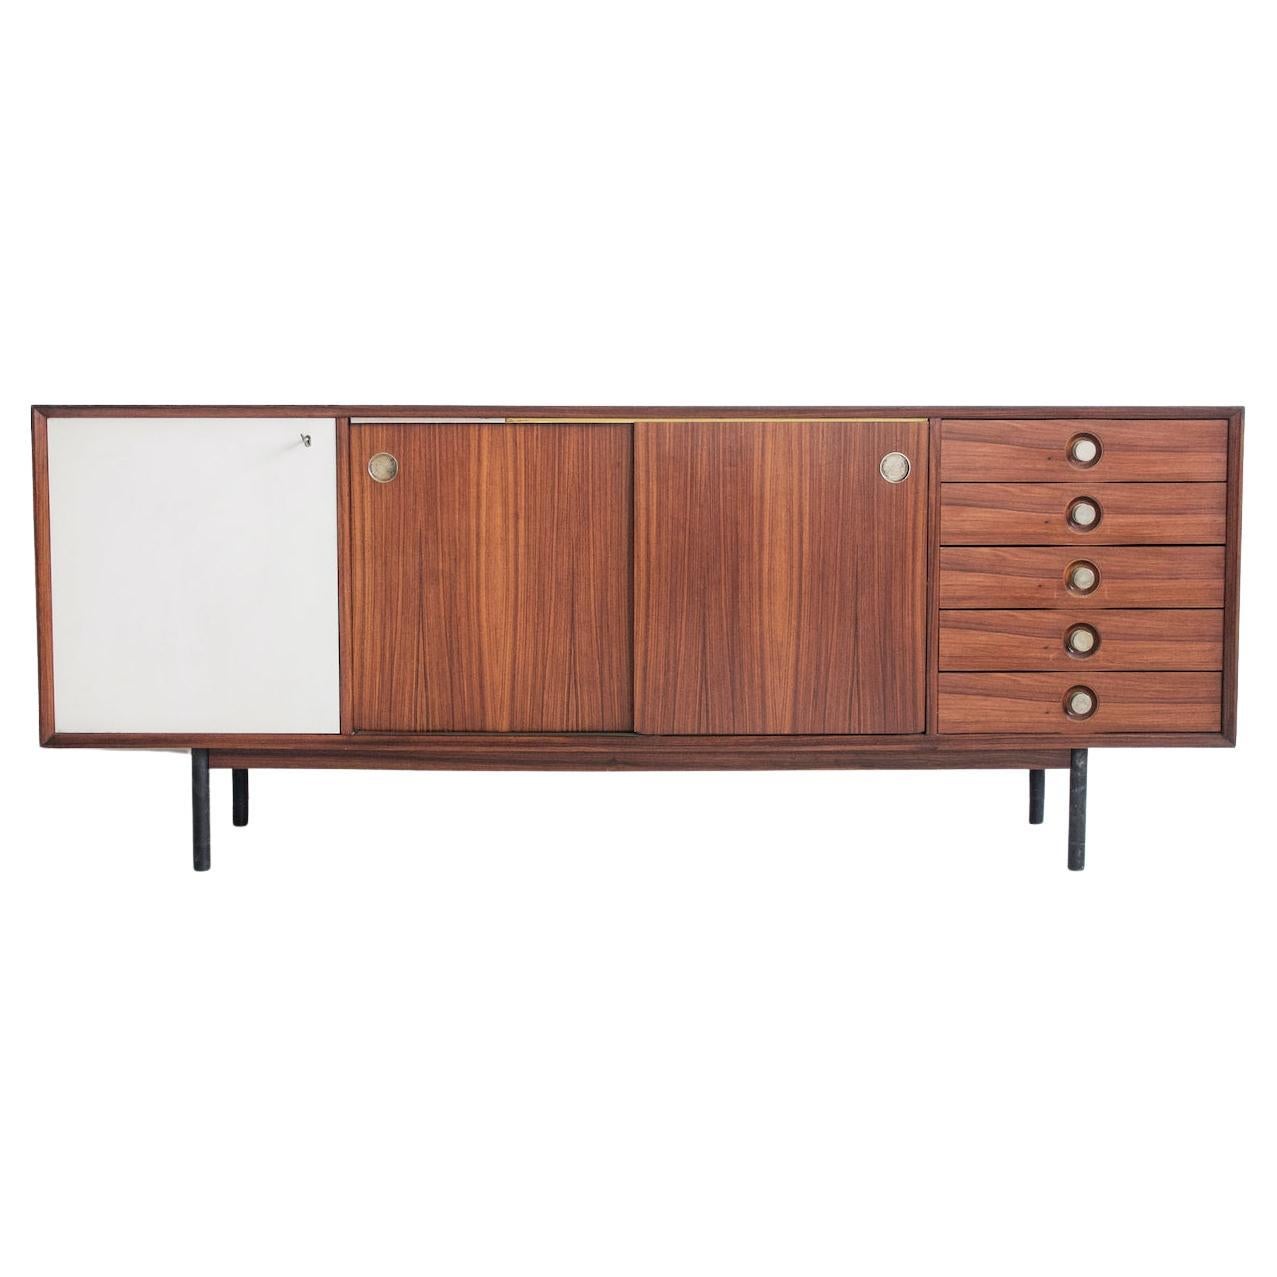 Wooden Sideboard with White Sliding Door and Drawers, circa 1960 For Sale